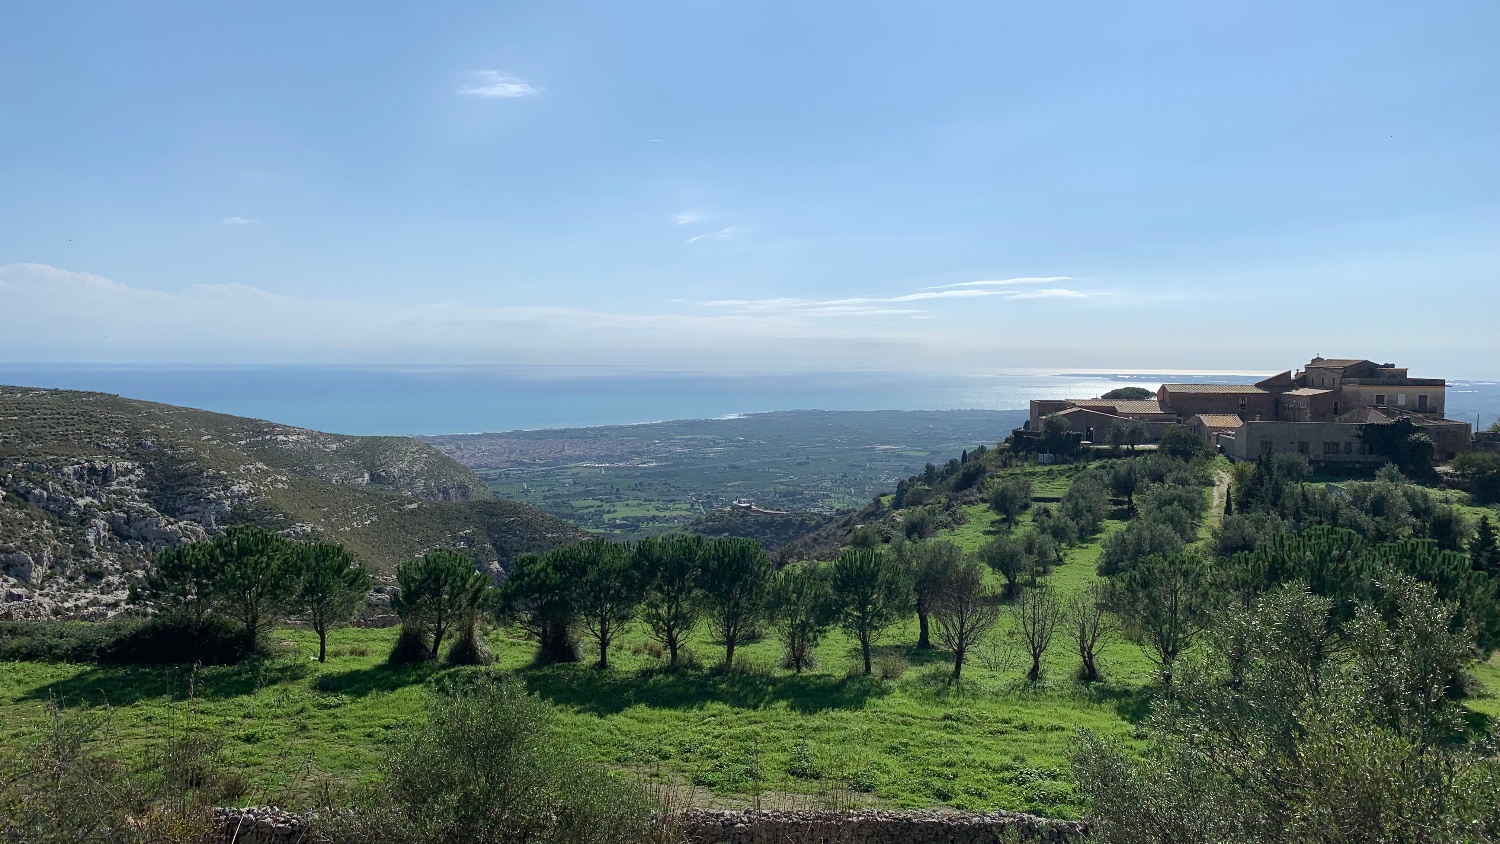 Sicily cycling tour seaside view with villa